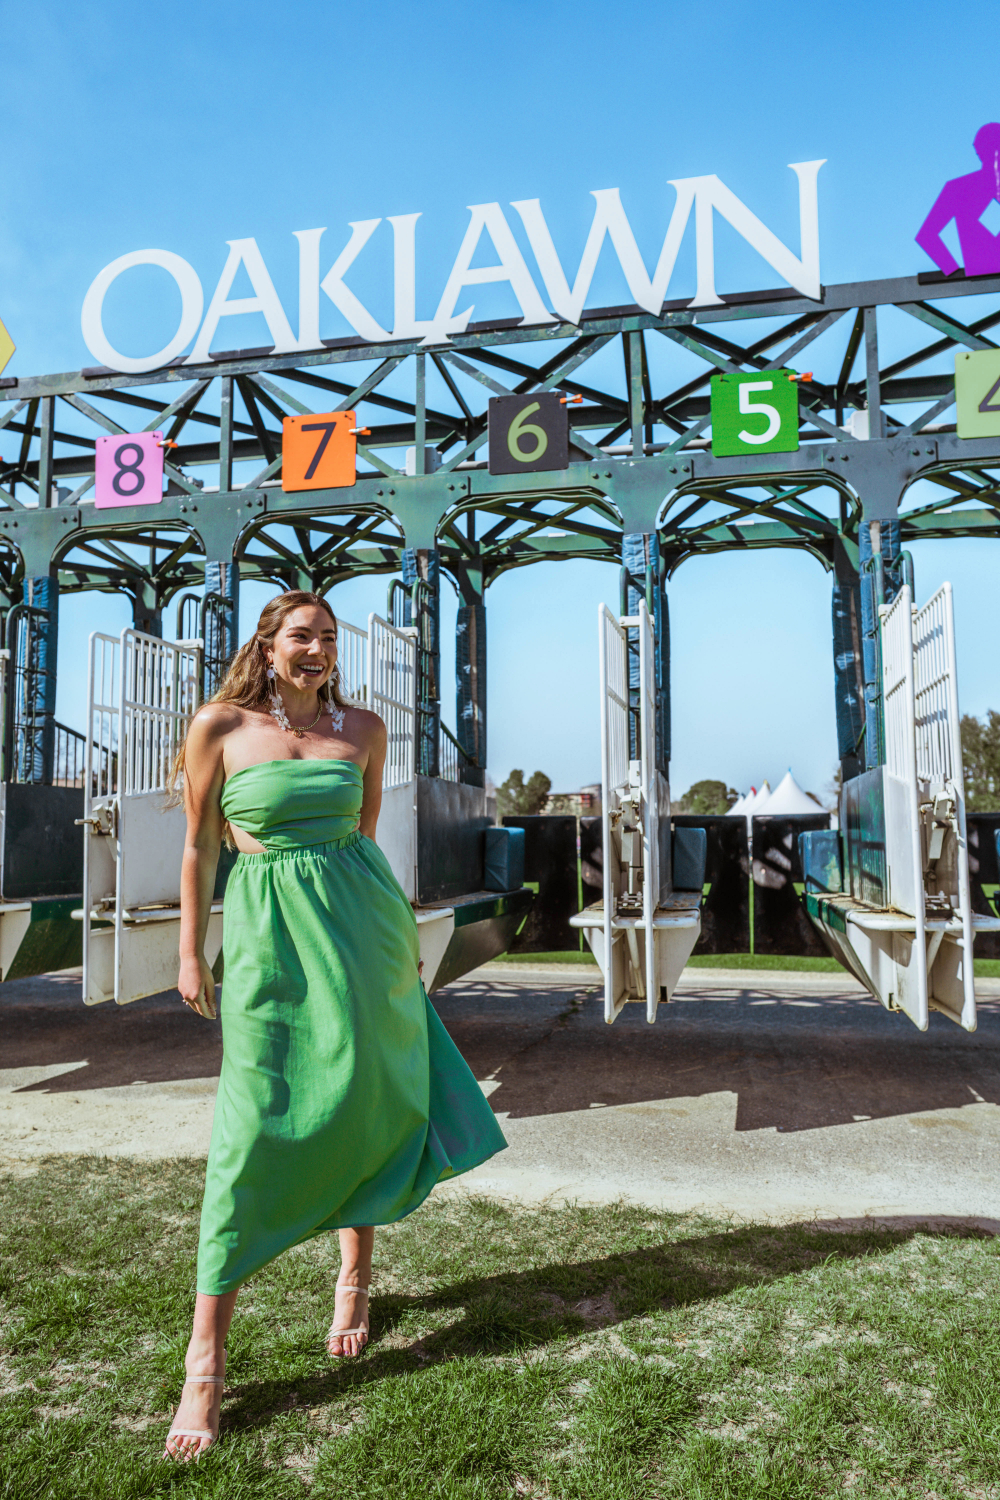 Fashion, beauty, and travel blogger Lauryn Hock in a green dress with cutouts at Oaklawn standing in front of the race gate